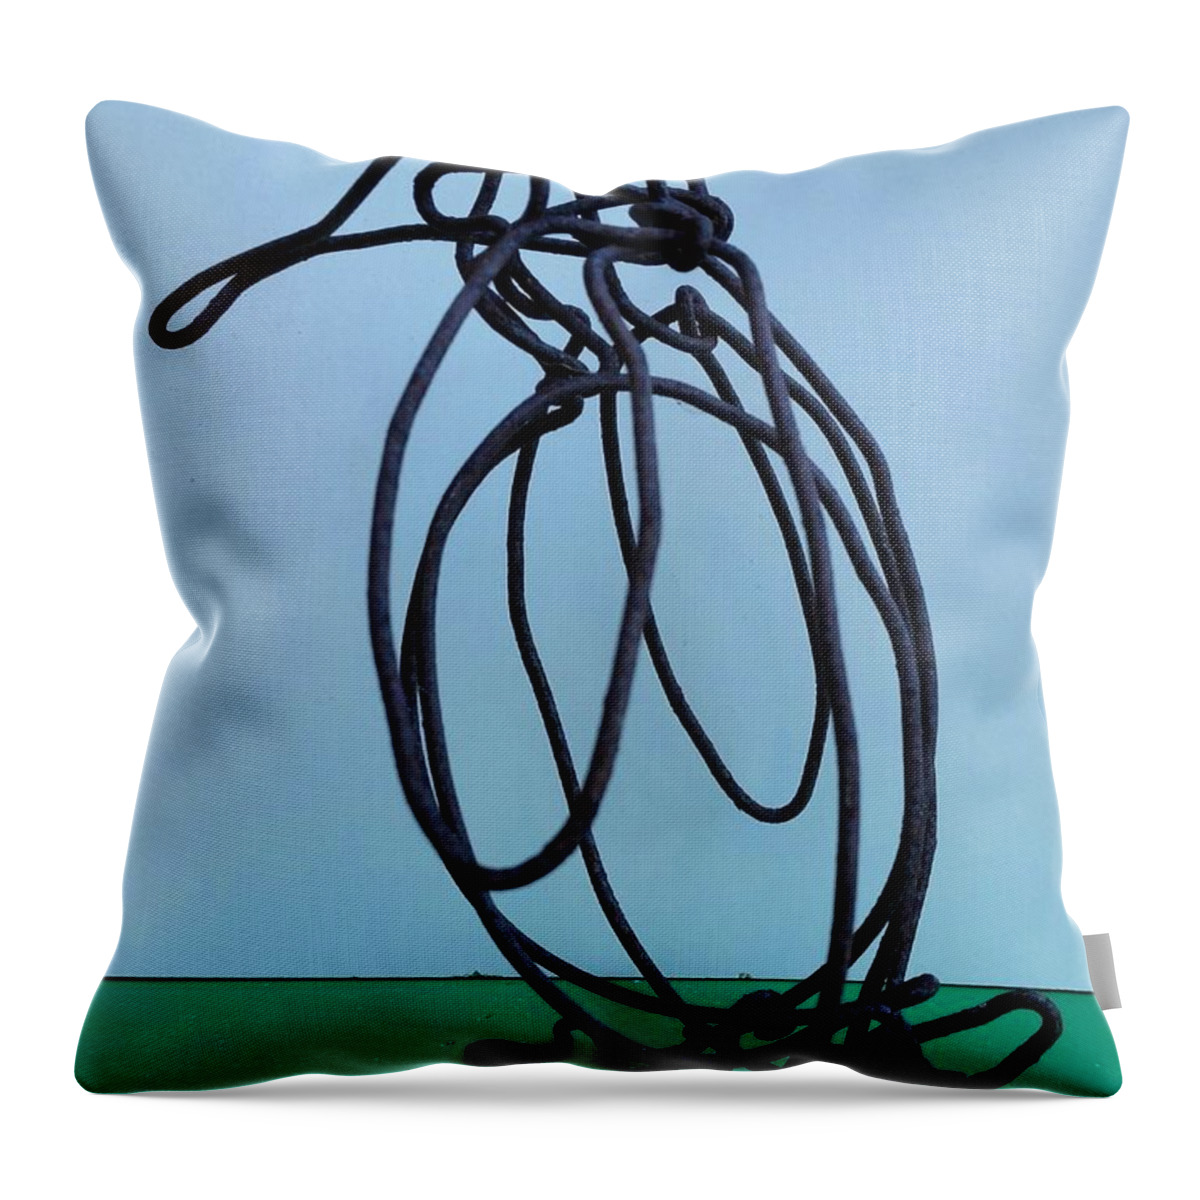 Penguin Throw Pillow featuring the sculpture Penguin by Edward Pebworth